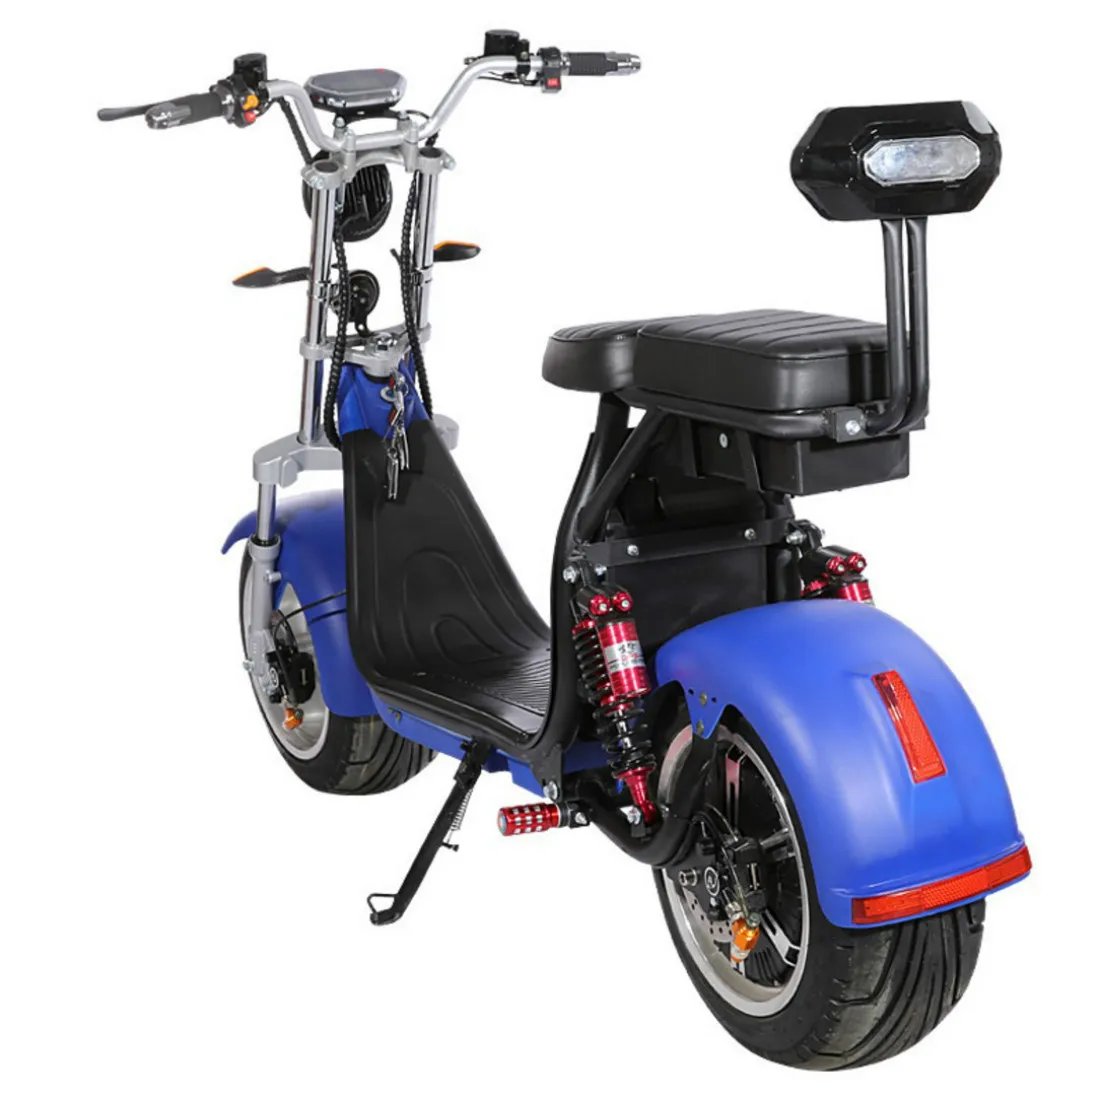 

Emark EEC COC European warehouse sur electric scooter for kids citycoco fat bike